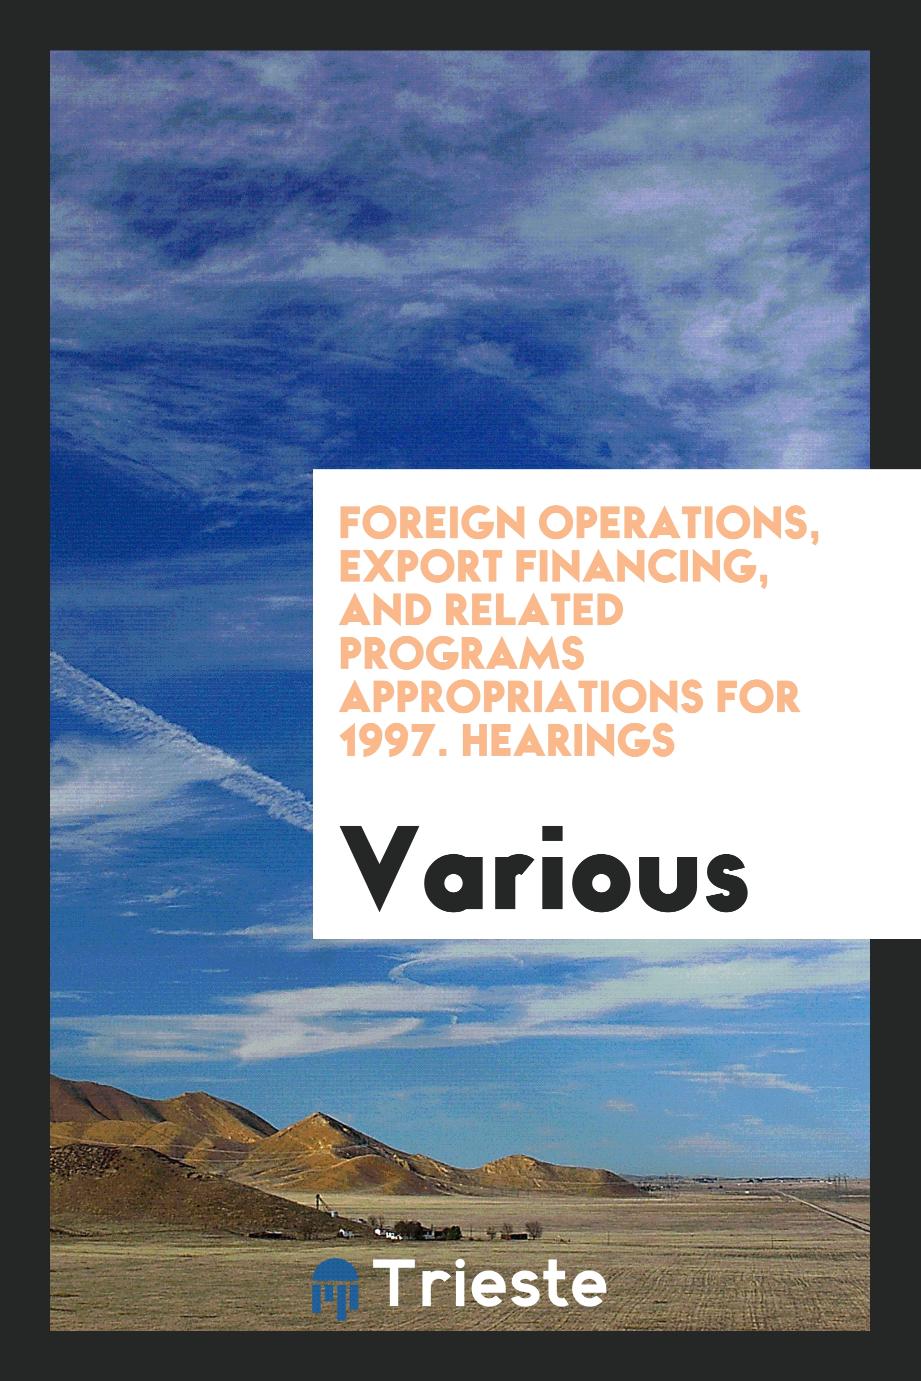 Foreign operations, export financing, and related programs appropriations for 1997. Hearings